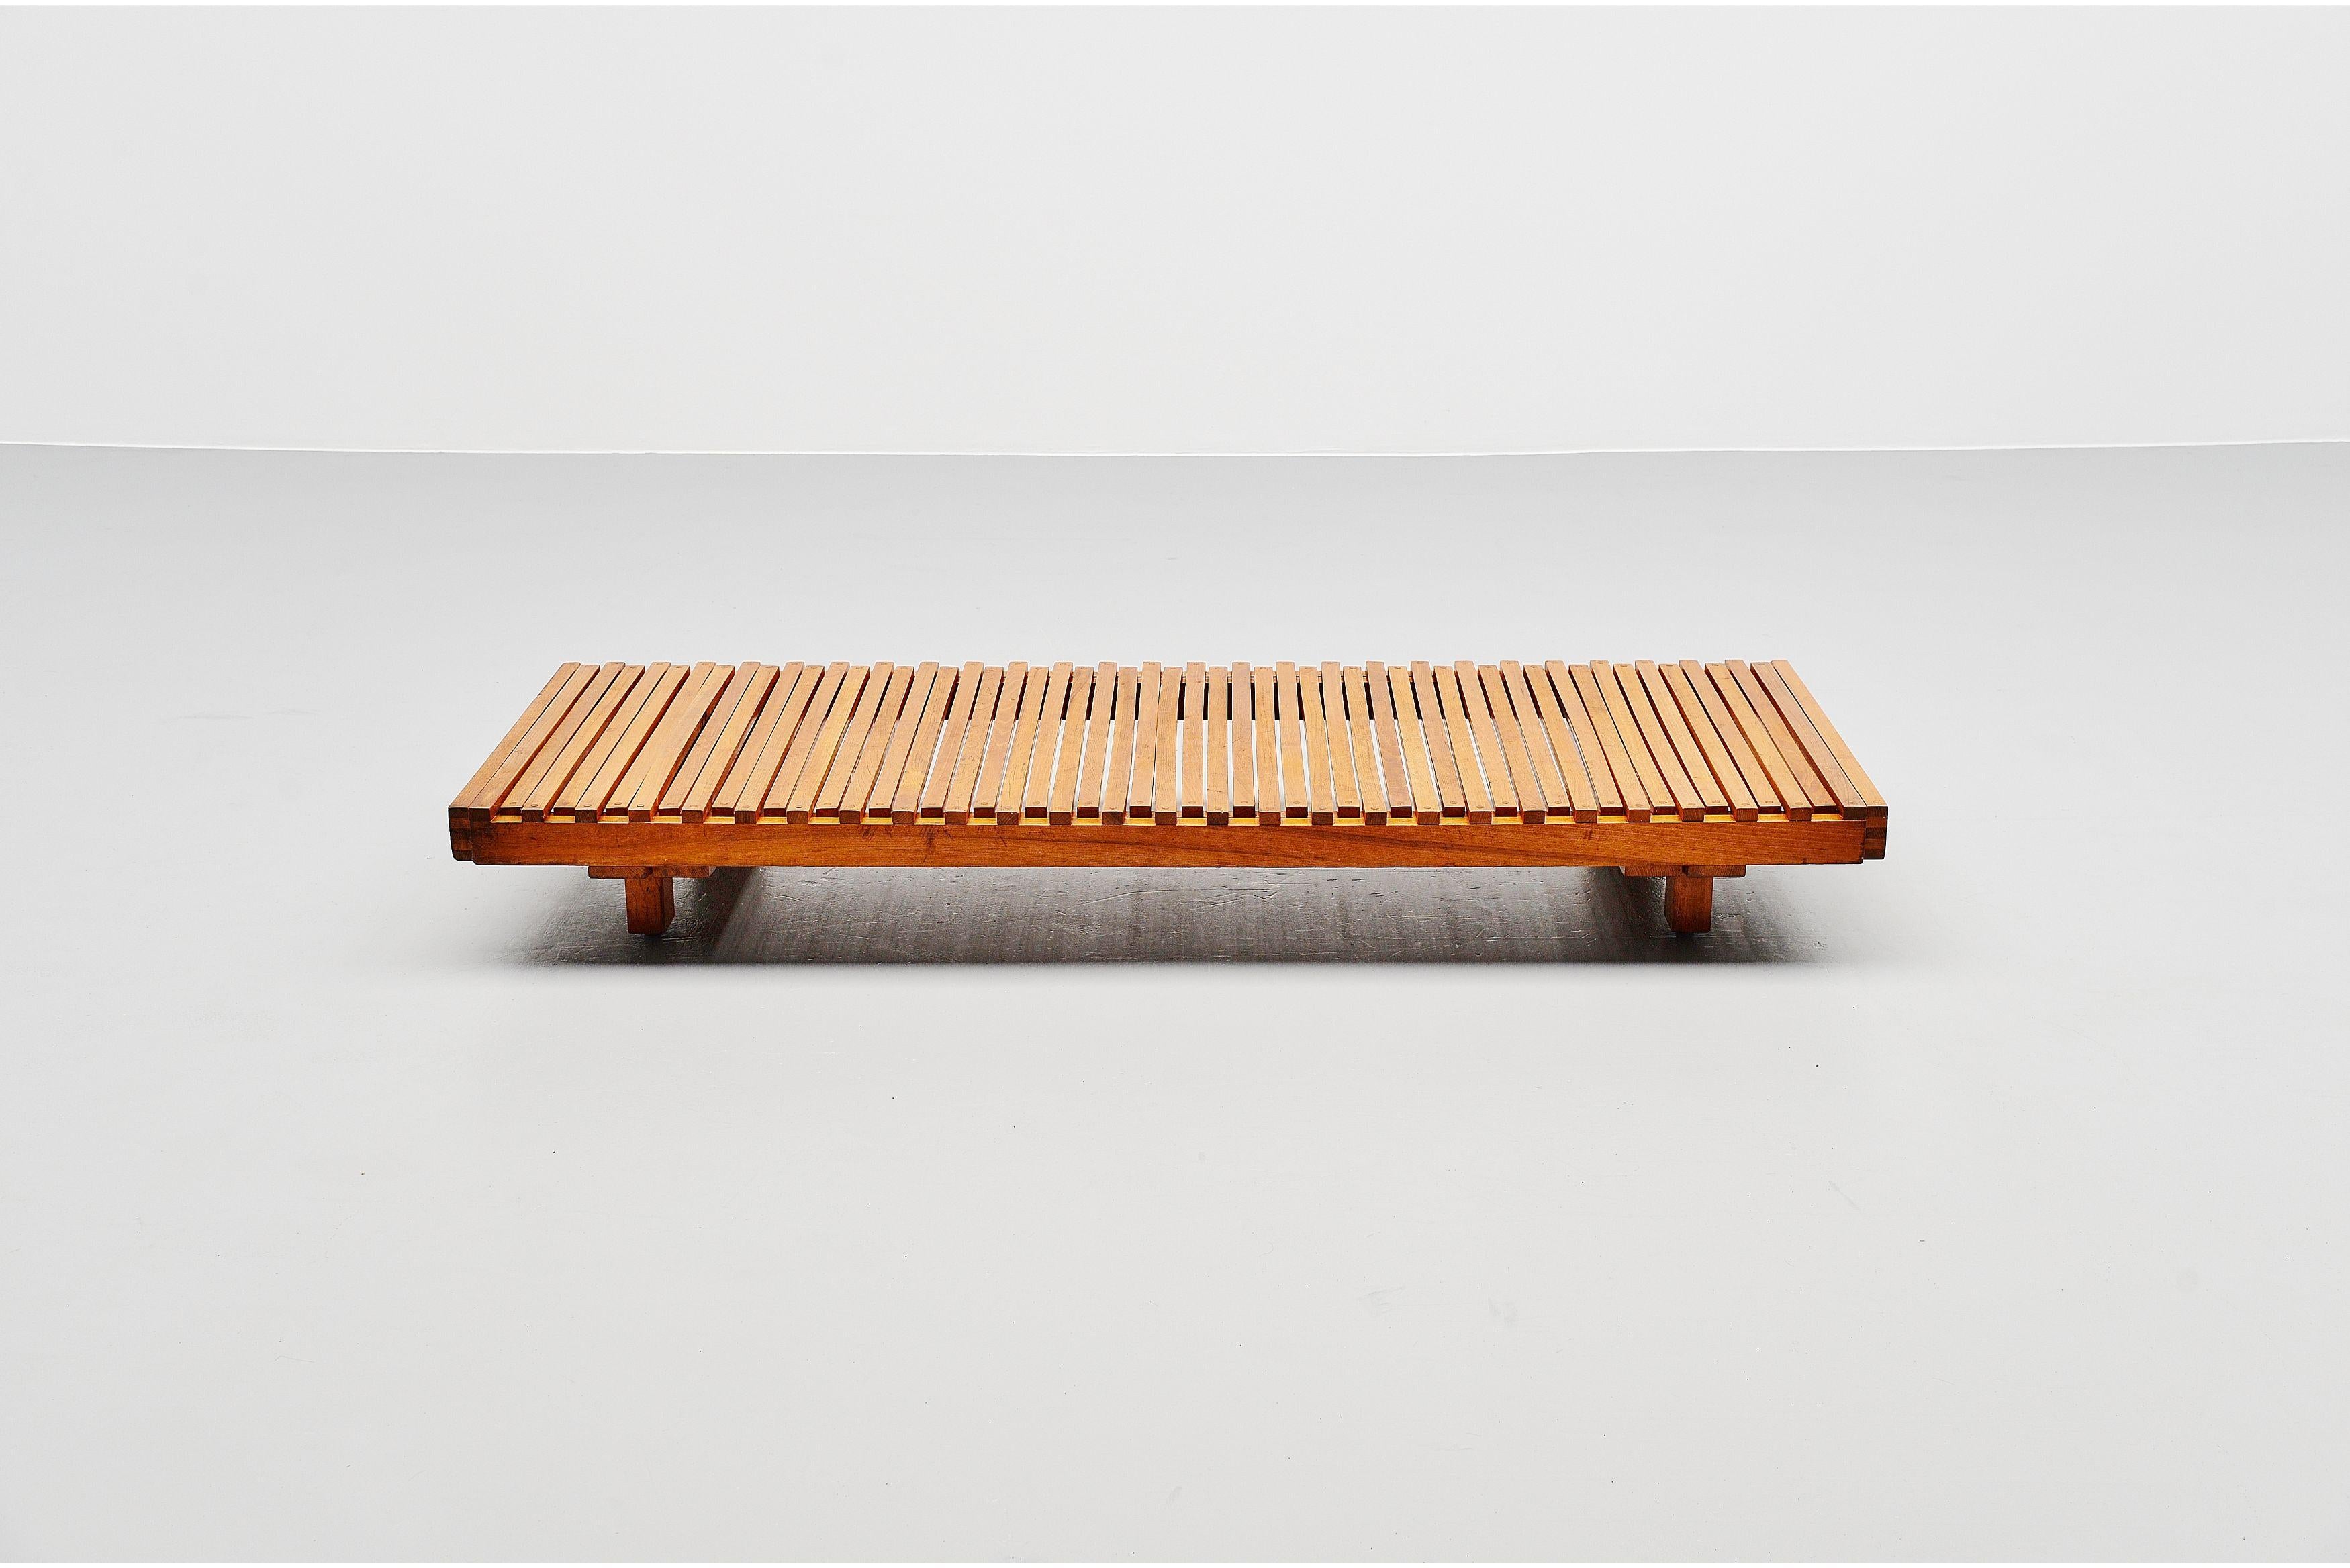 Rare first production L07 extendable daybed sofa designed by Pierre Chapo and manufactured in his own atelier, France 1963. This super nice and technical masterpiece was from the very first production which had the visible dowel connections of how